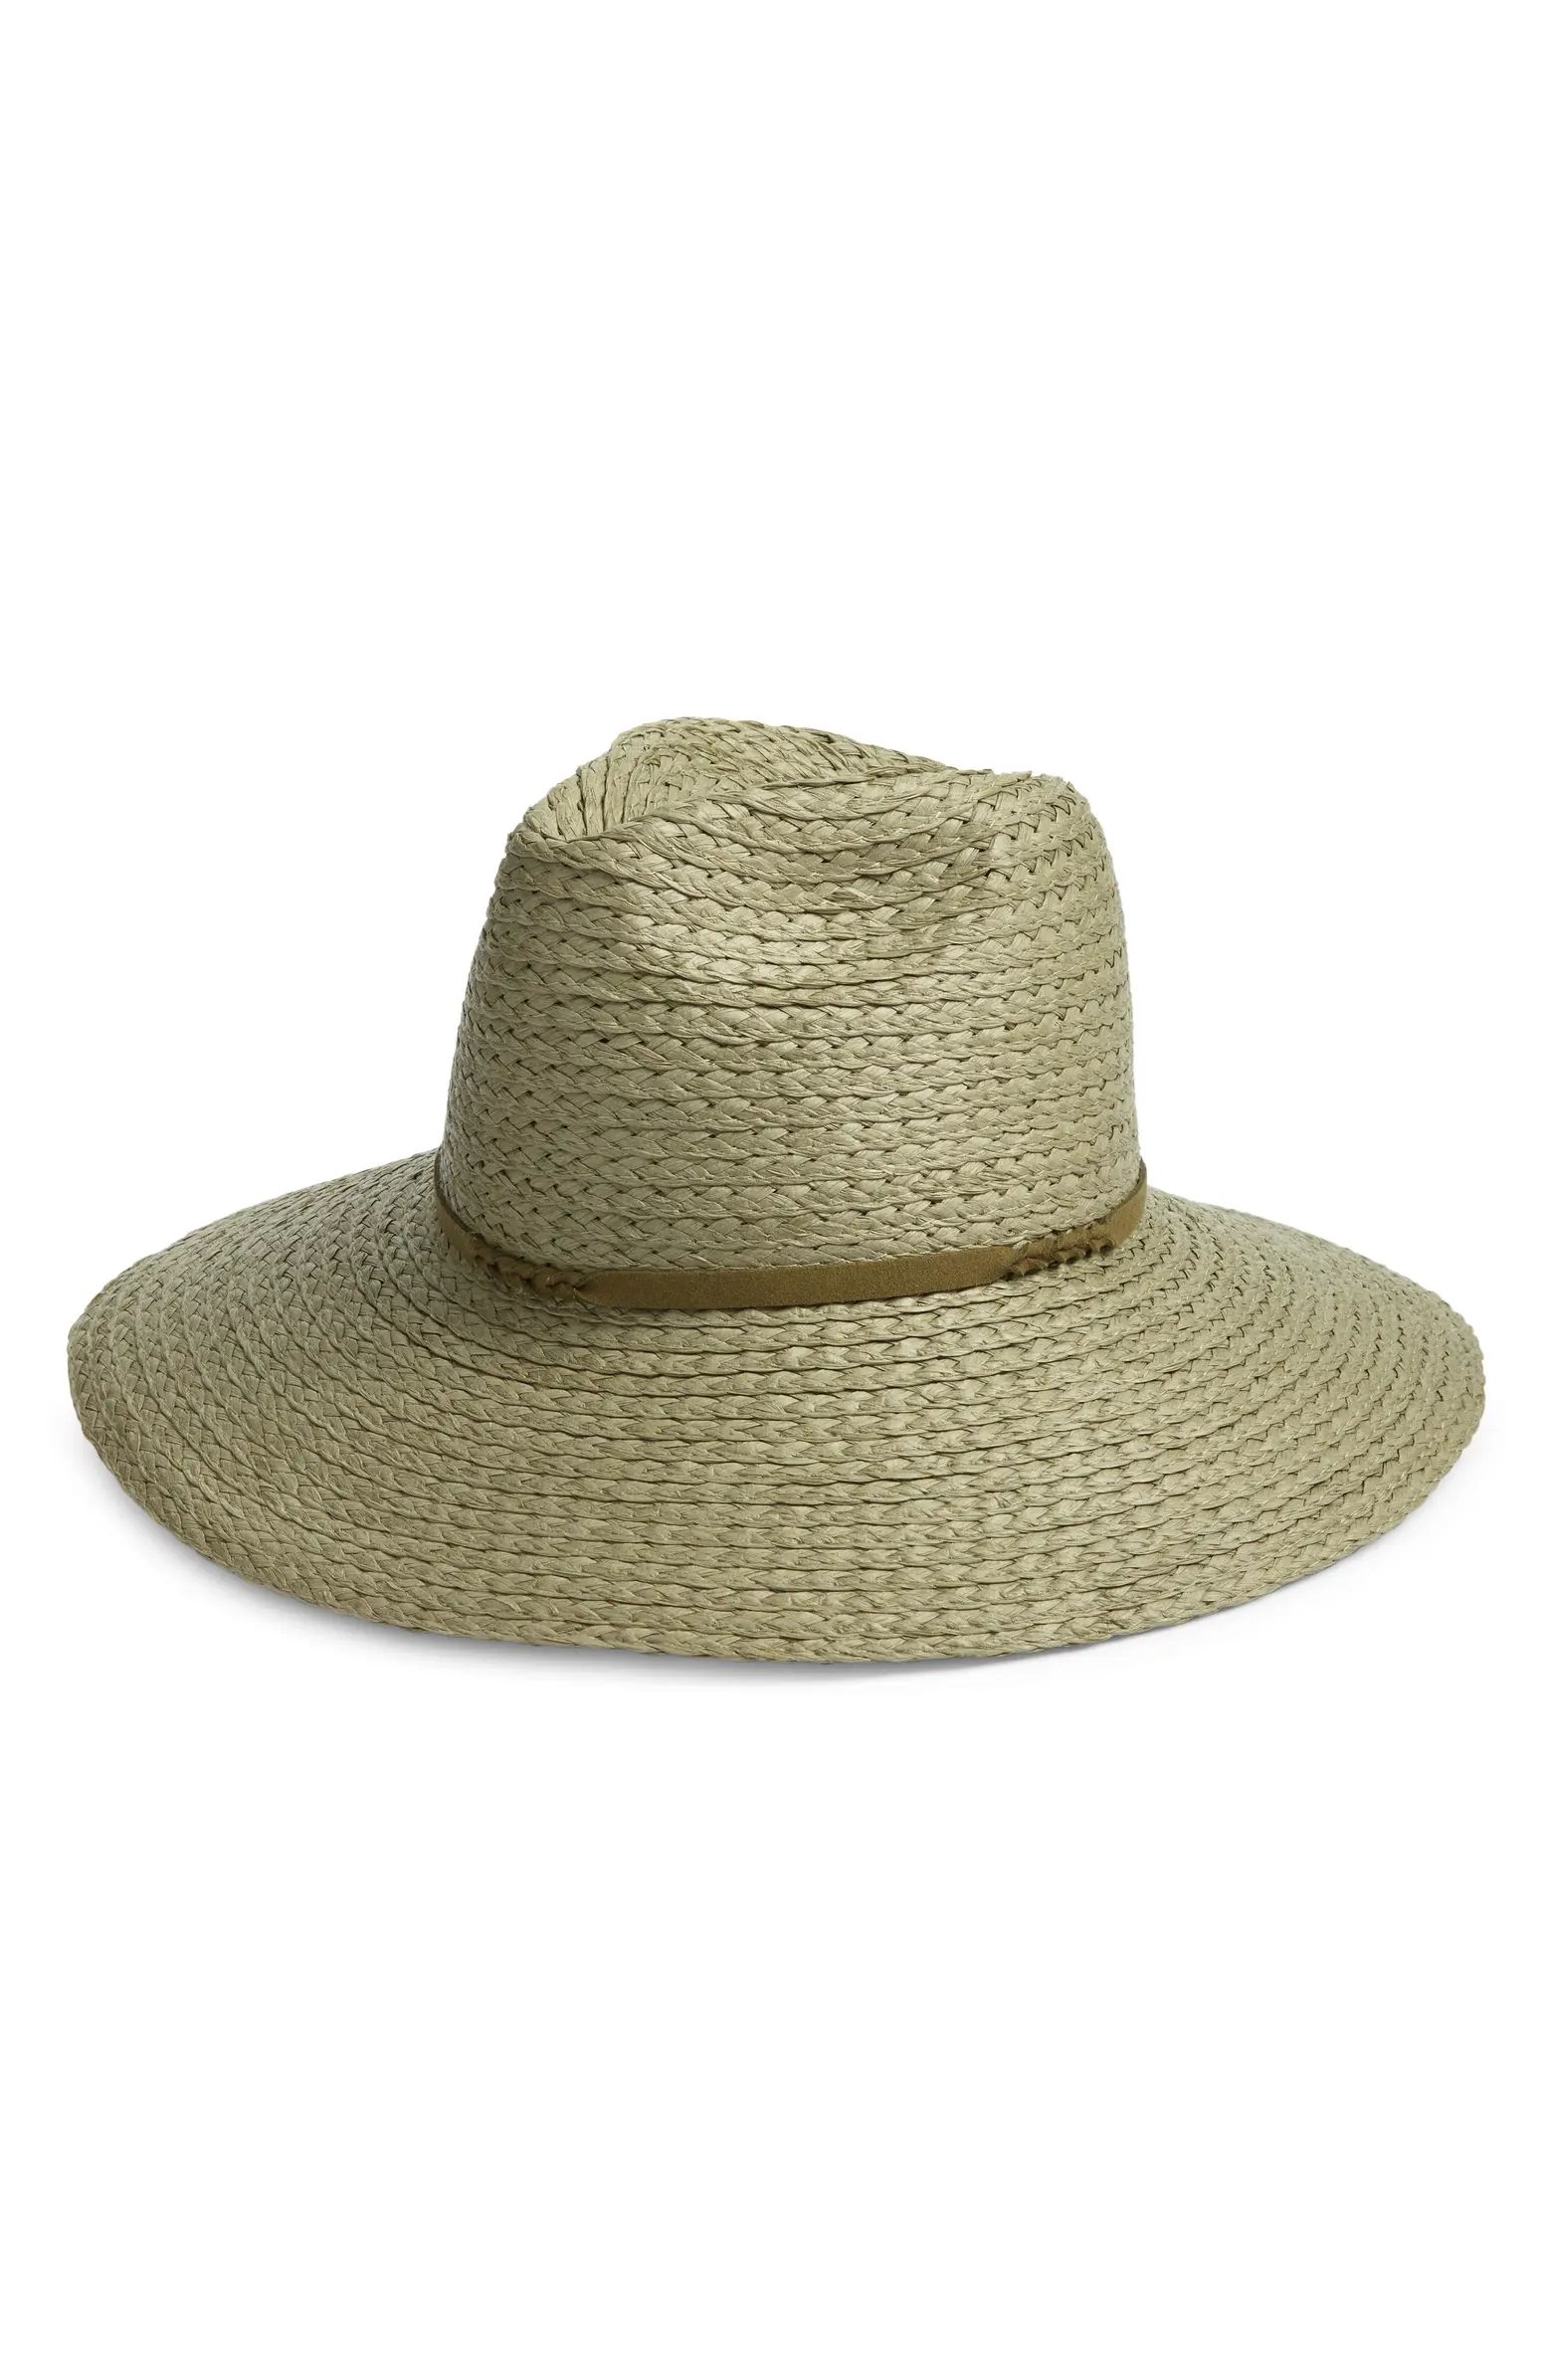 Relaxed Braided Paper Straw Panama Hat | Nordstrom